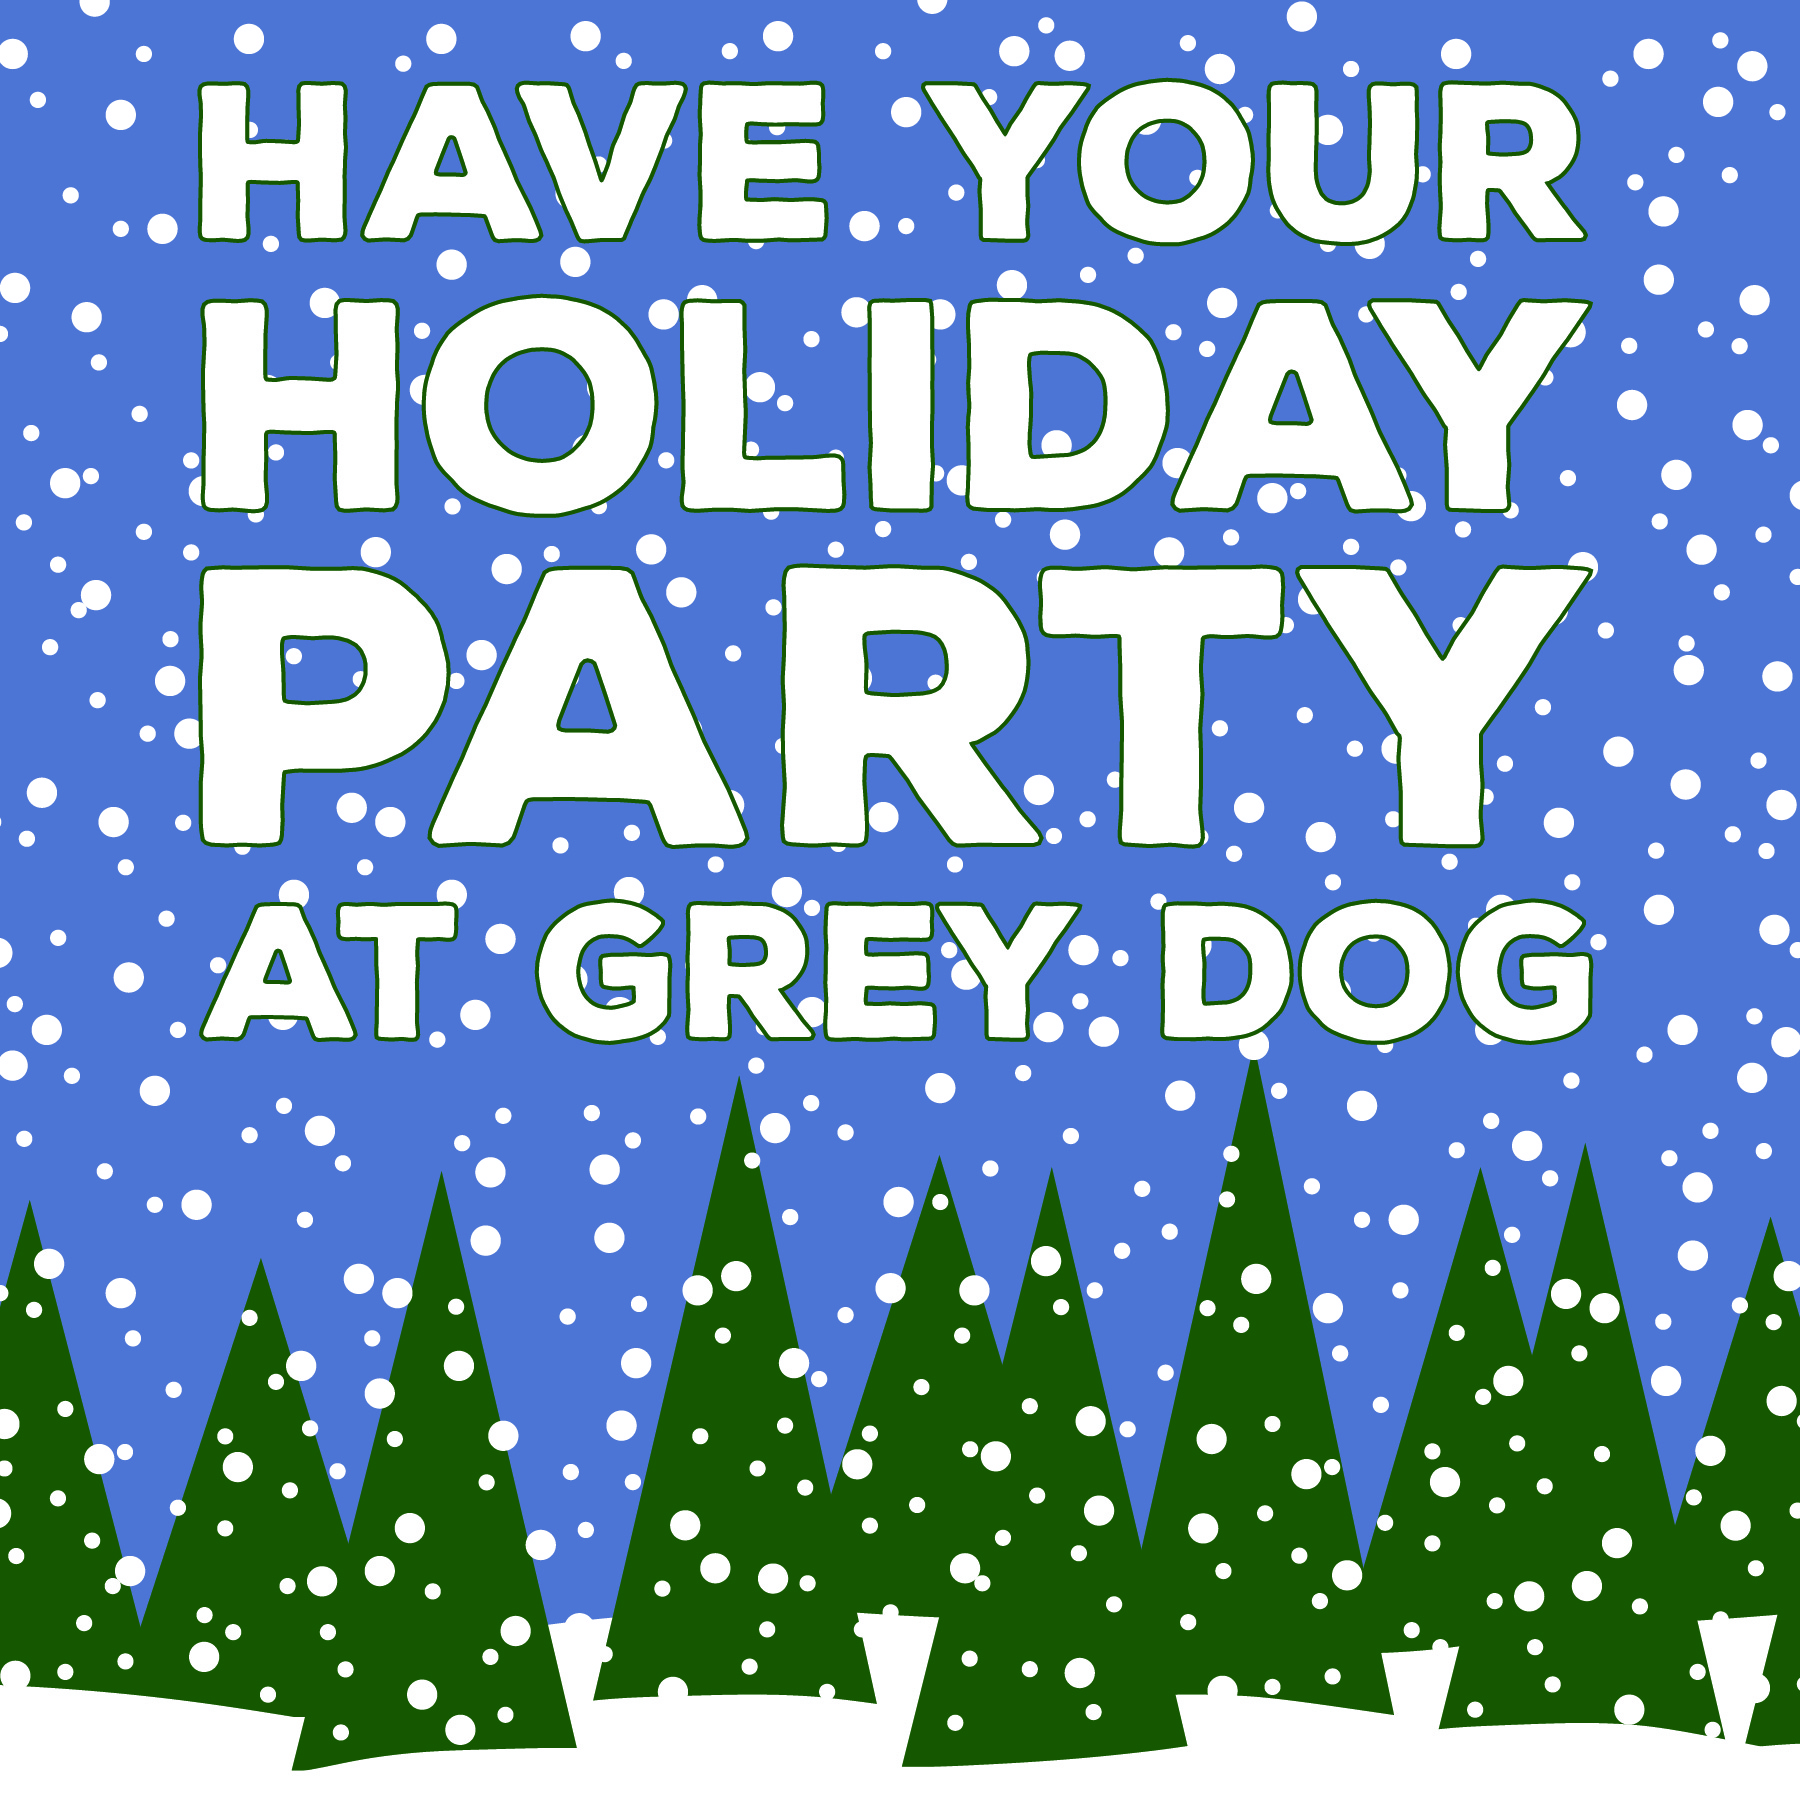 Have your holiday party at The Grey Dog